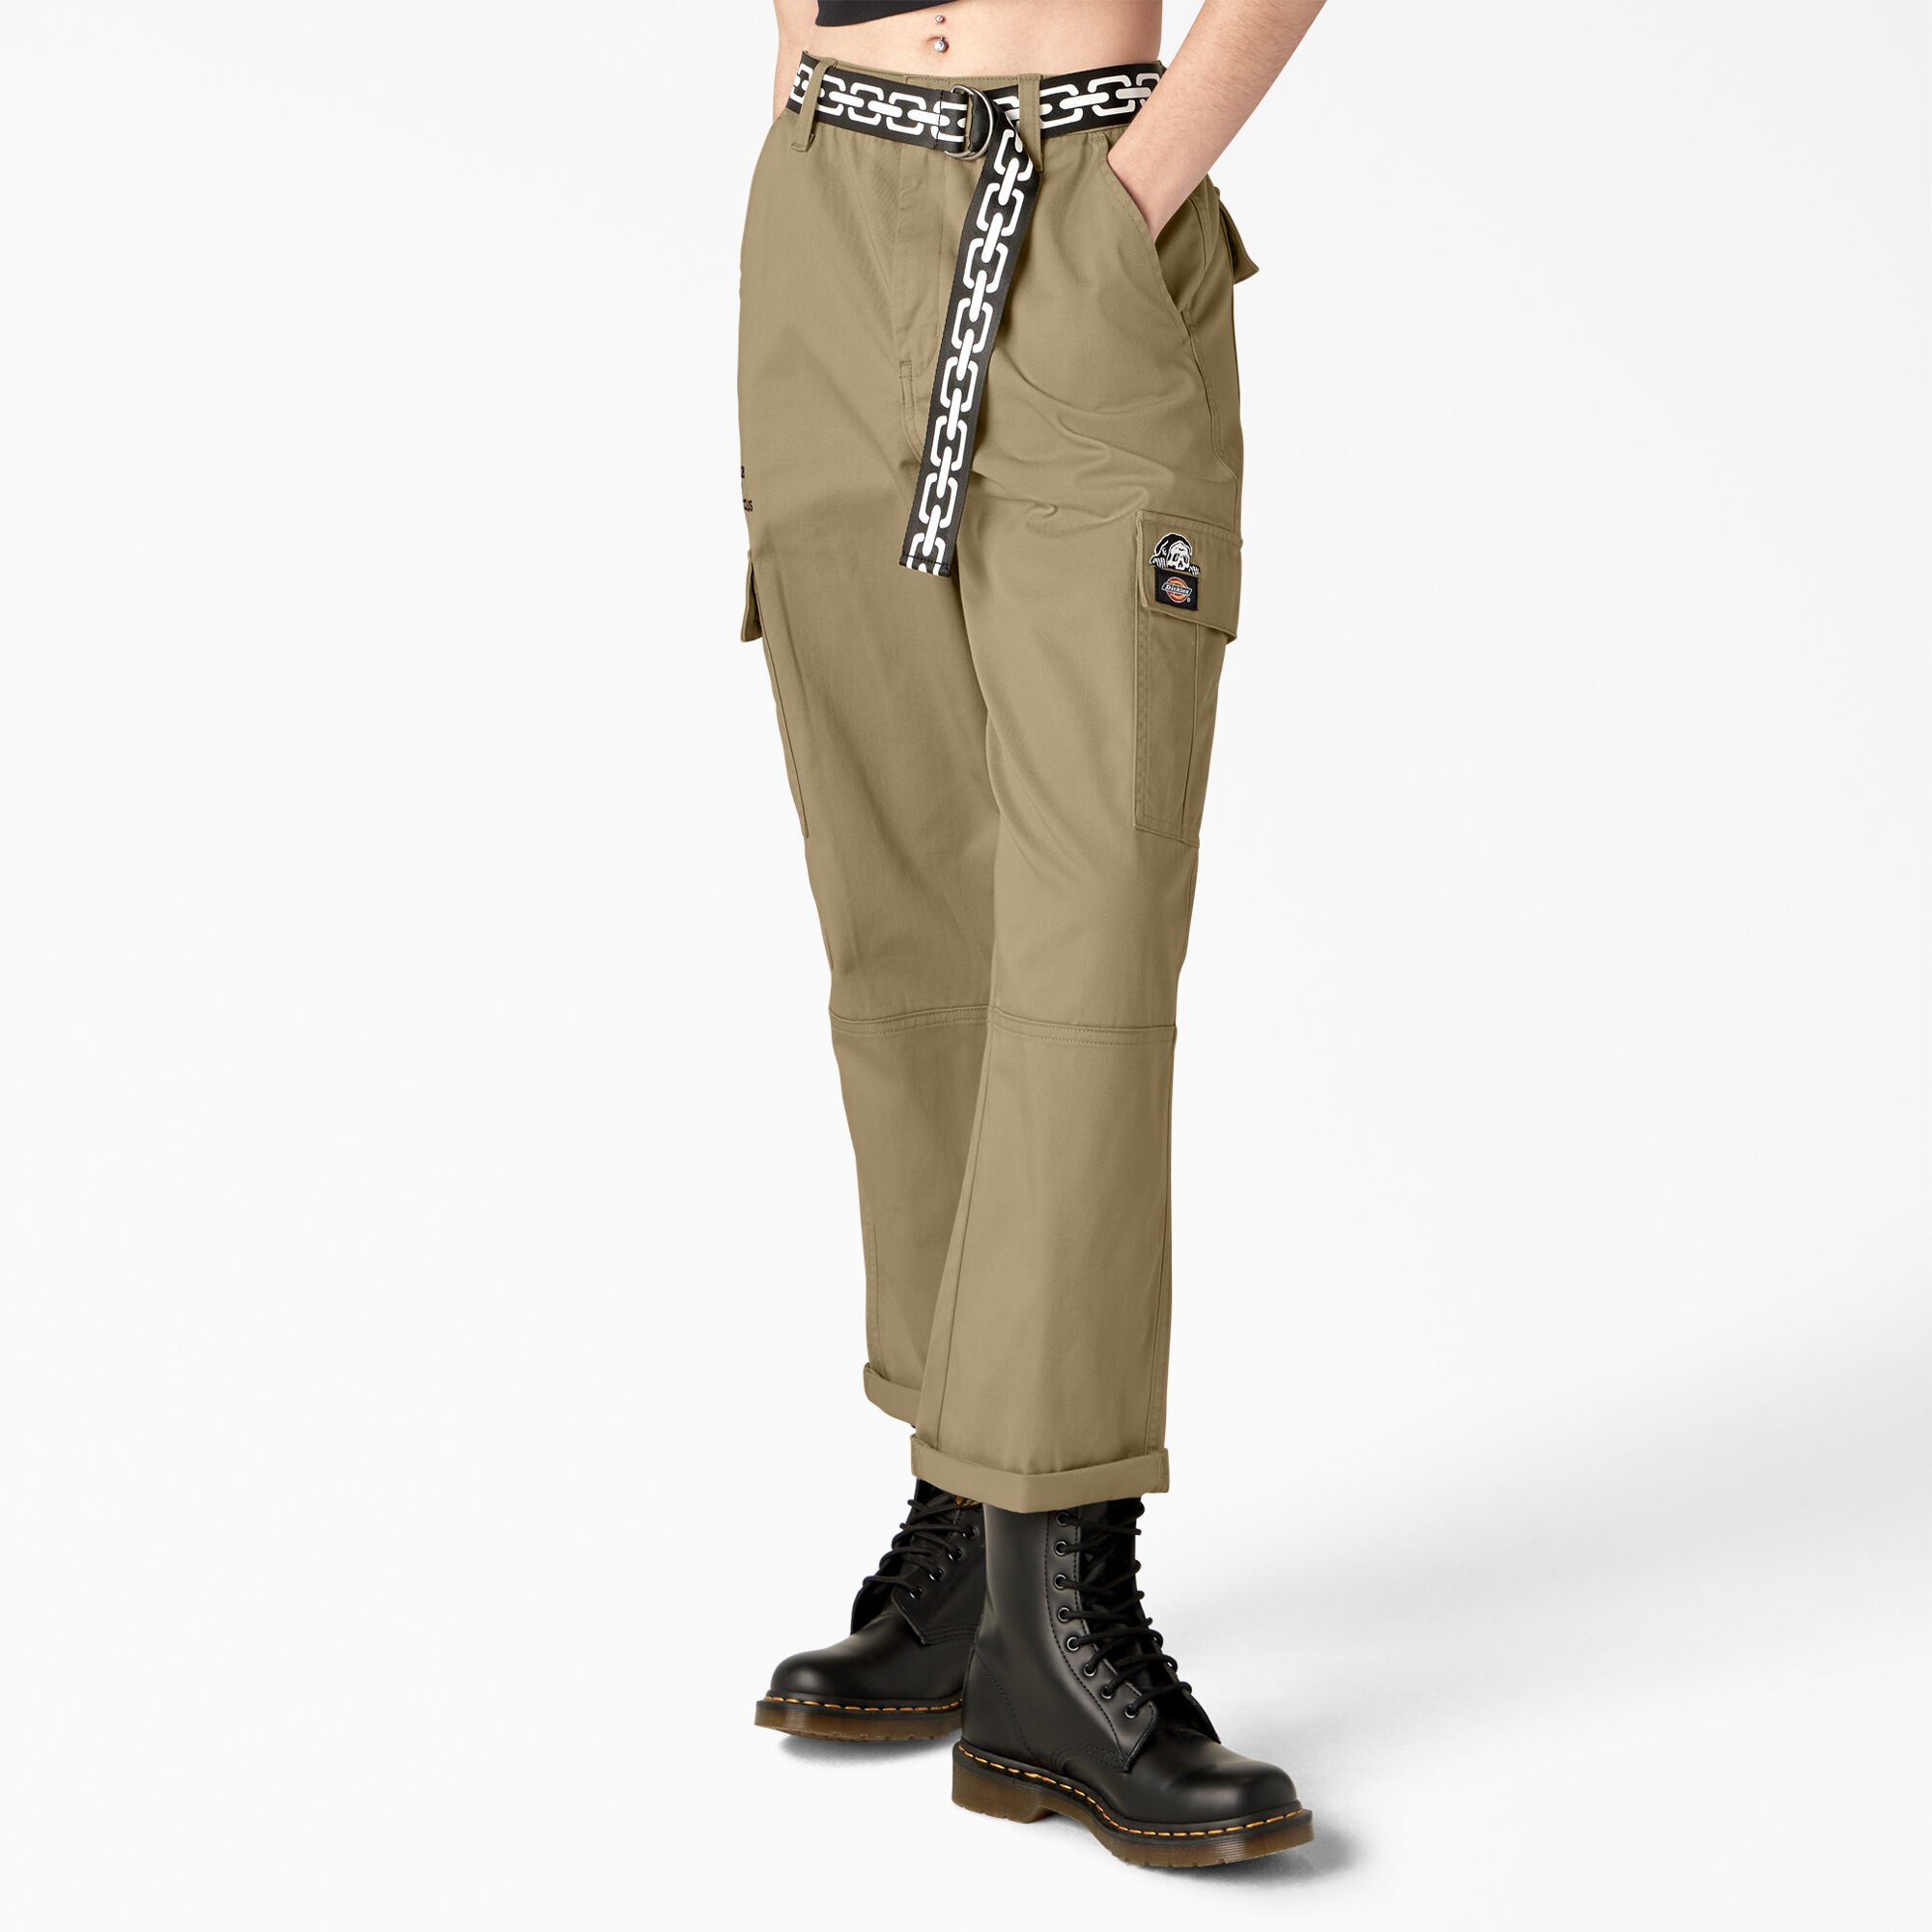 Ow Embroidery Cotton Cargo Pants